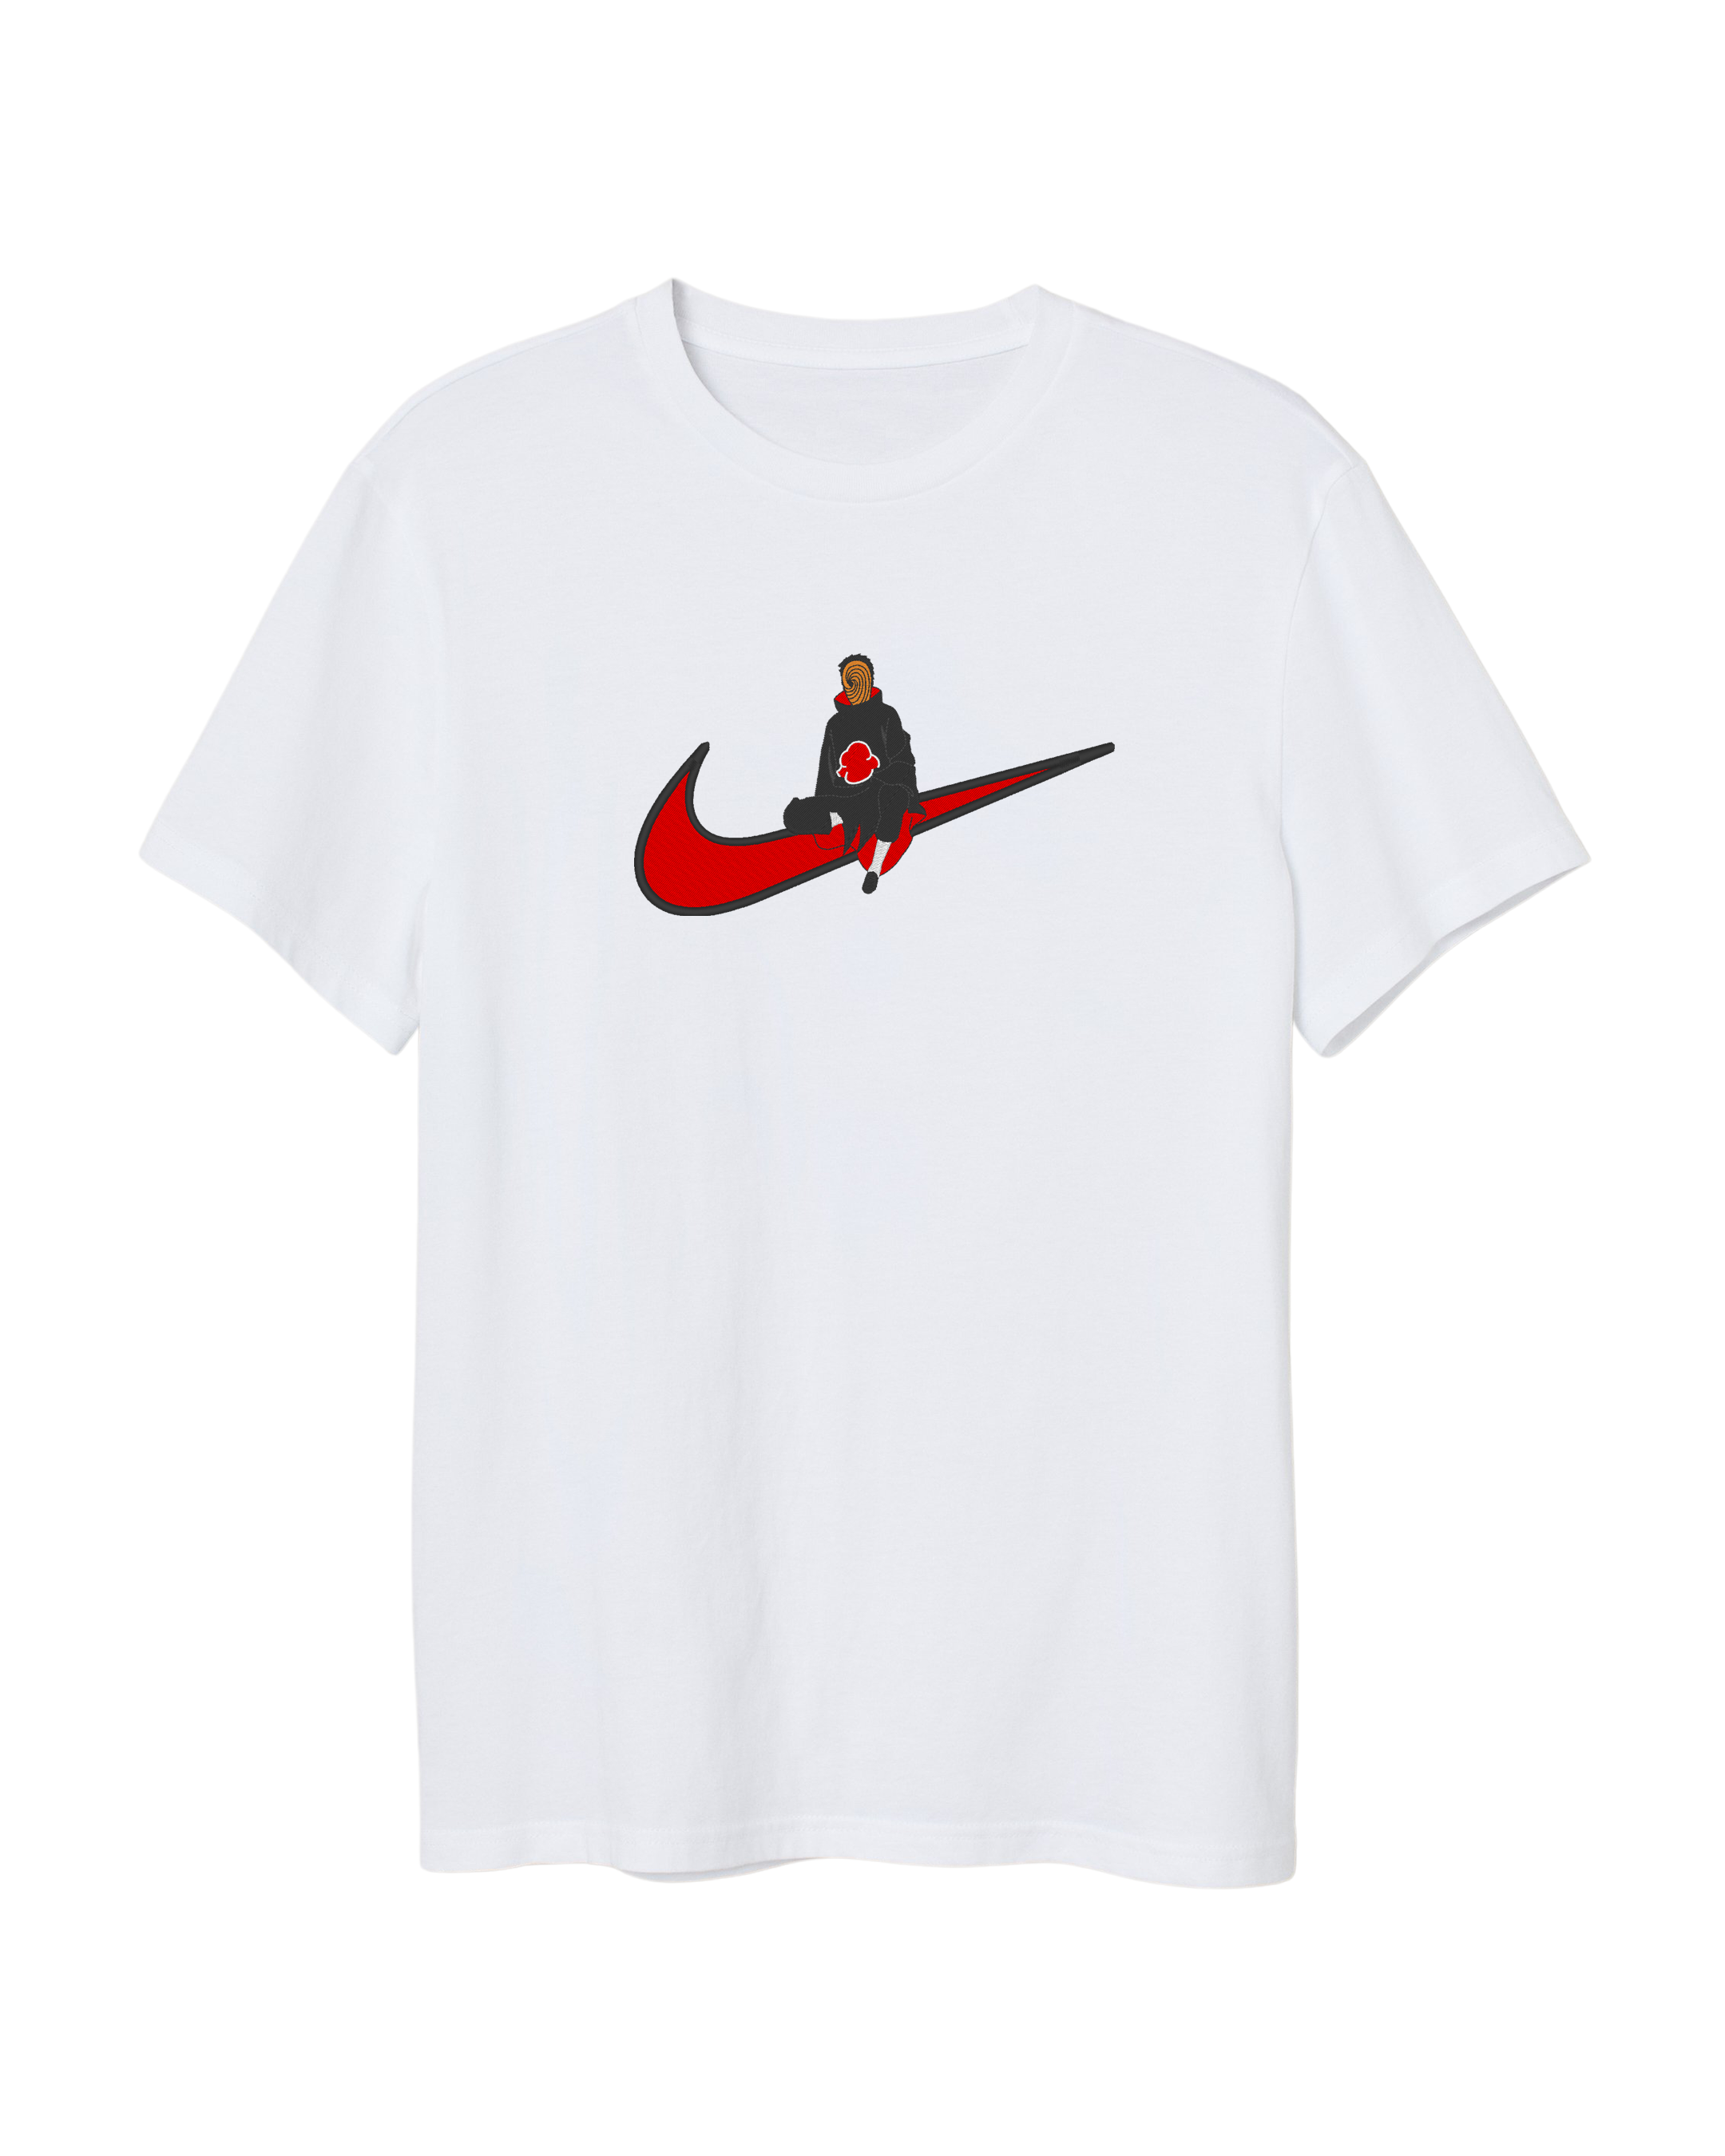 Nike Anime T-Shirts for Sale | Redbubble